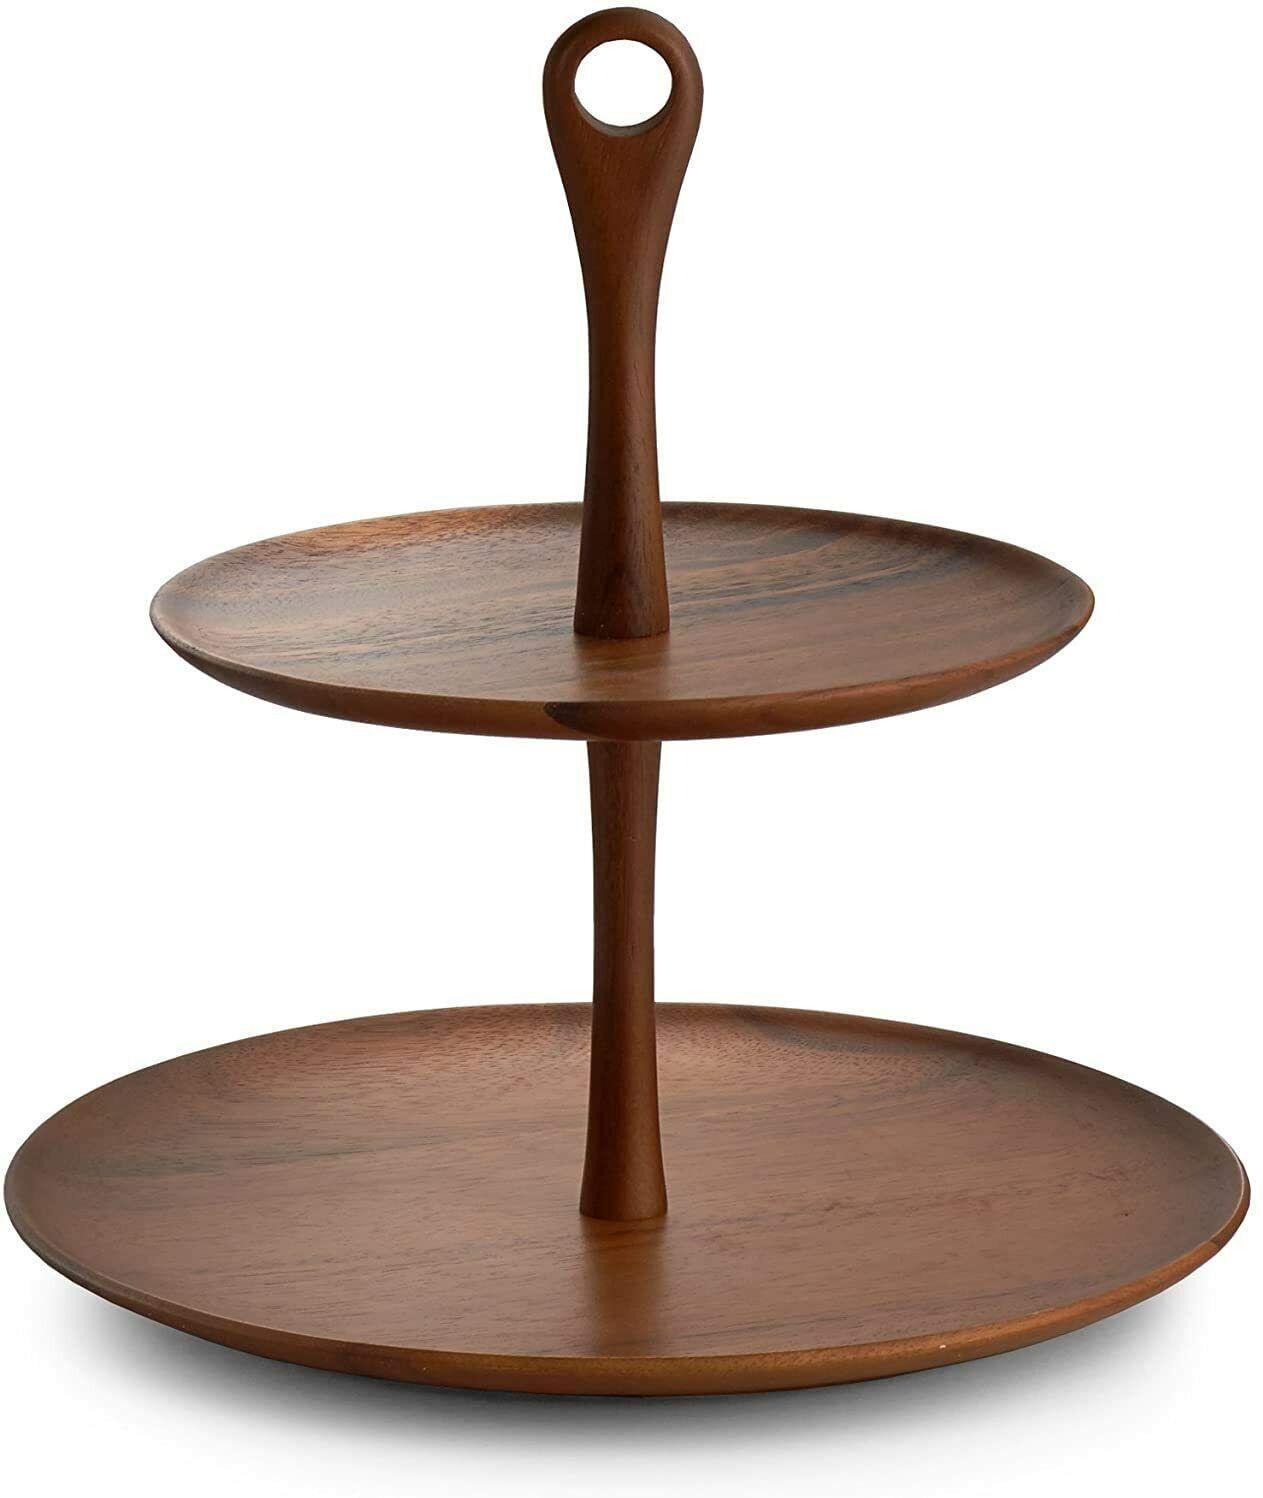 Nambe Skye Collection Acacia Wood Tiered Dessert Stand, 12.5 x 12.5 H - $86.99